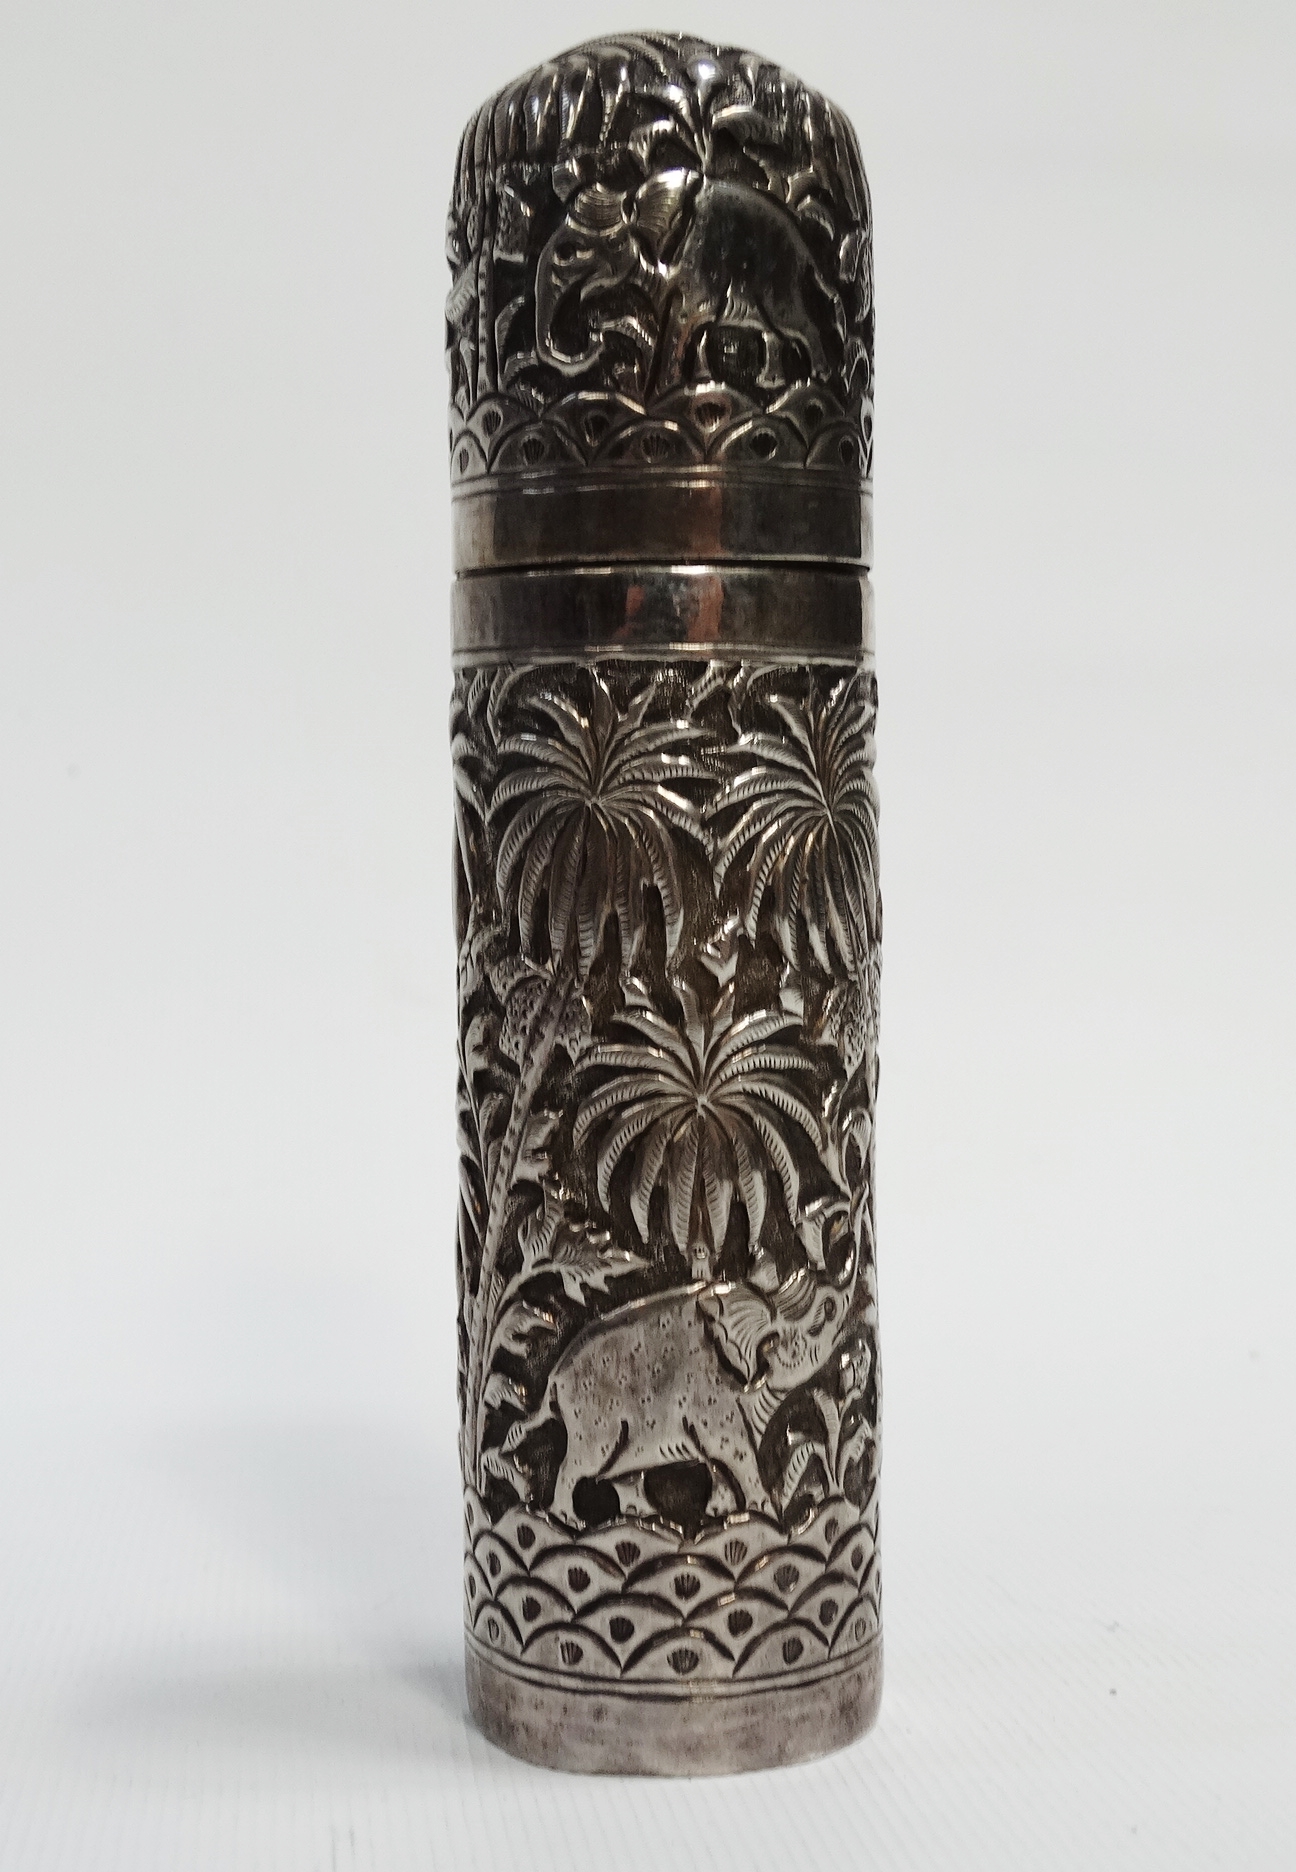 An Indian silver cylindrical box - Repousse decorated with elephants, tigers and stag in a palm